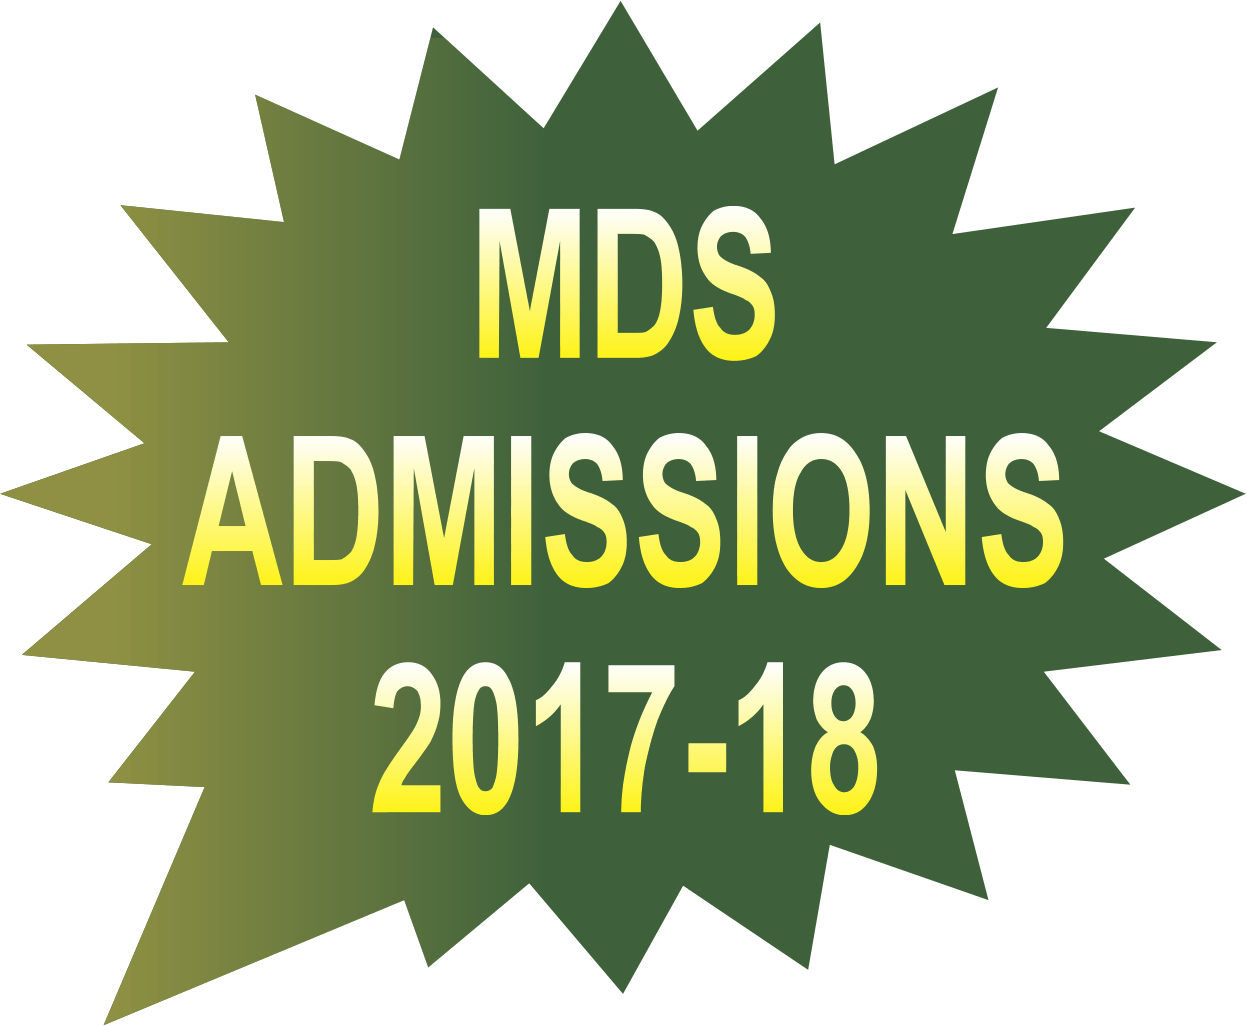 MDS Admissions 2017-18